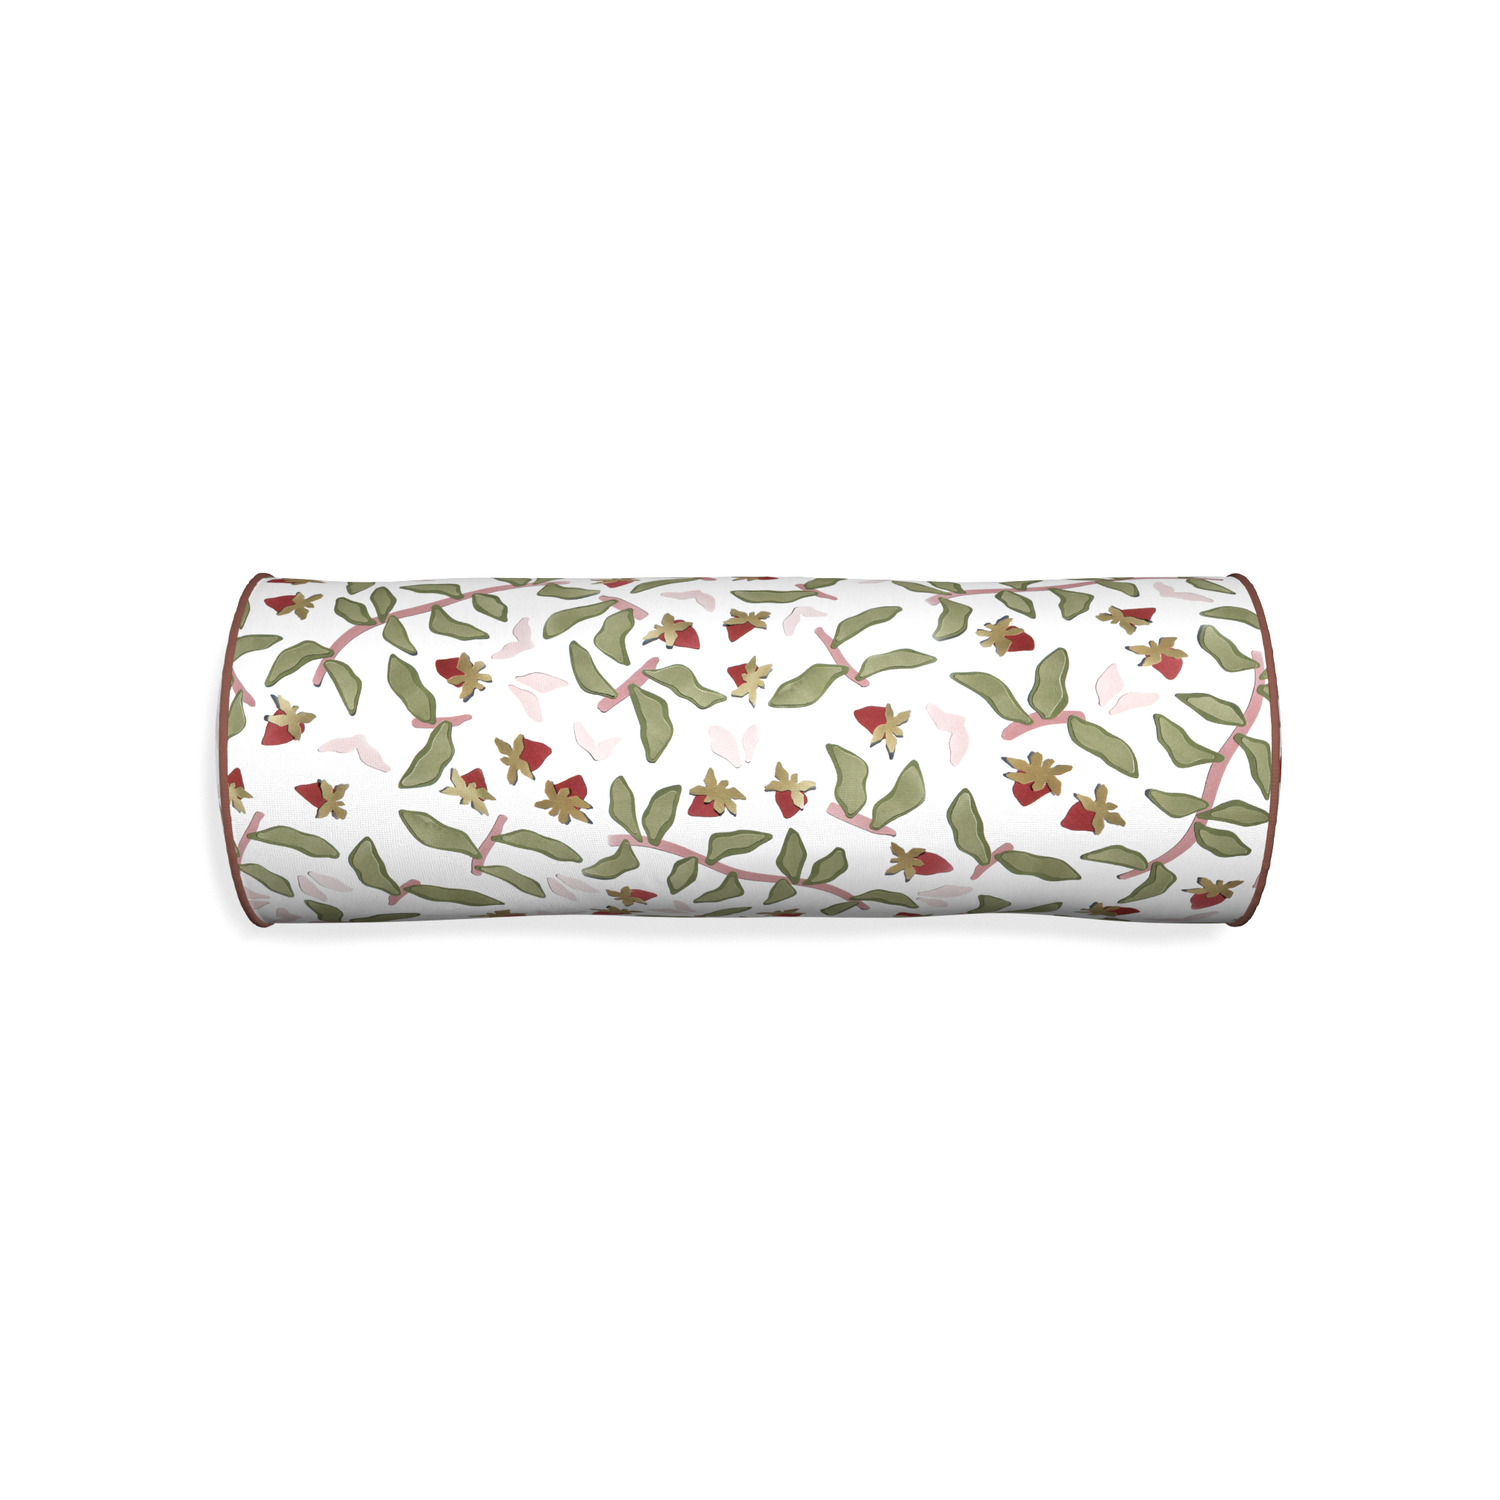 Bolster nellie custom strawberry & botanicalpillow with w piping on white background